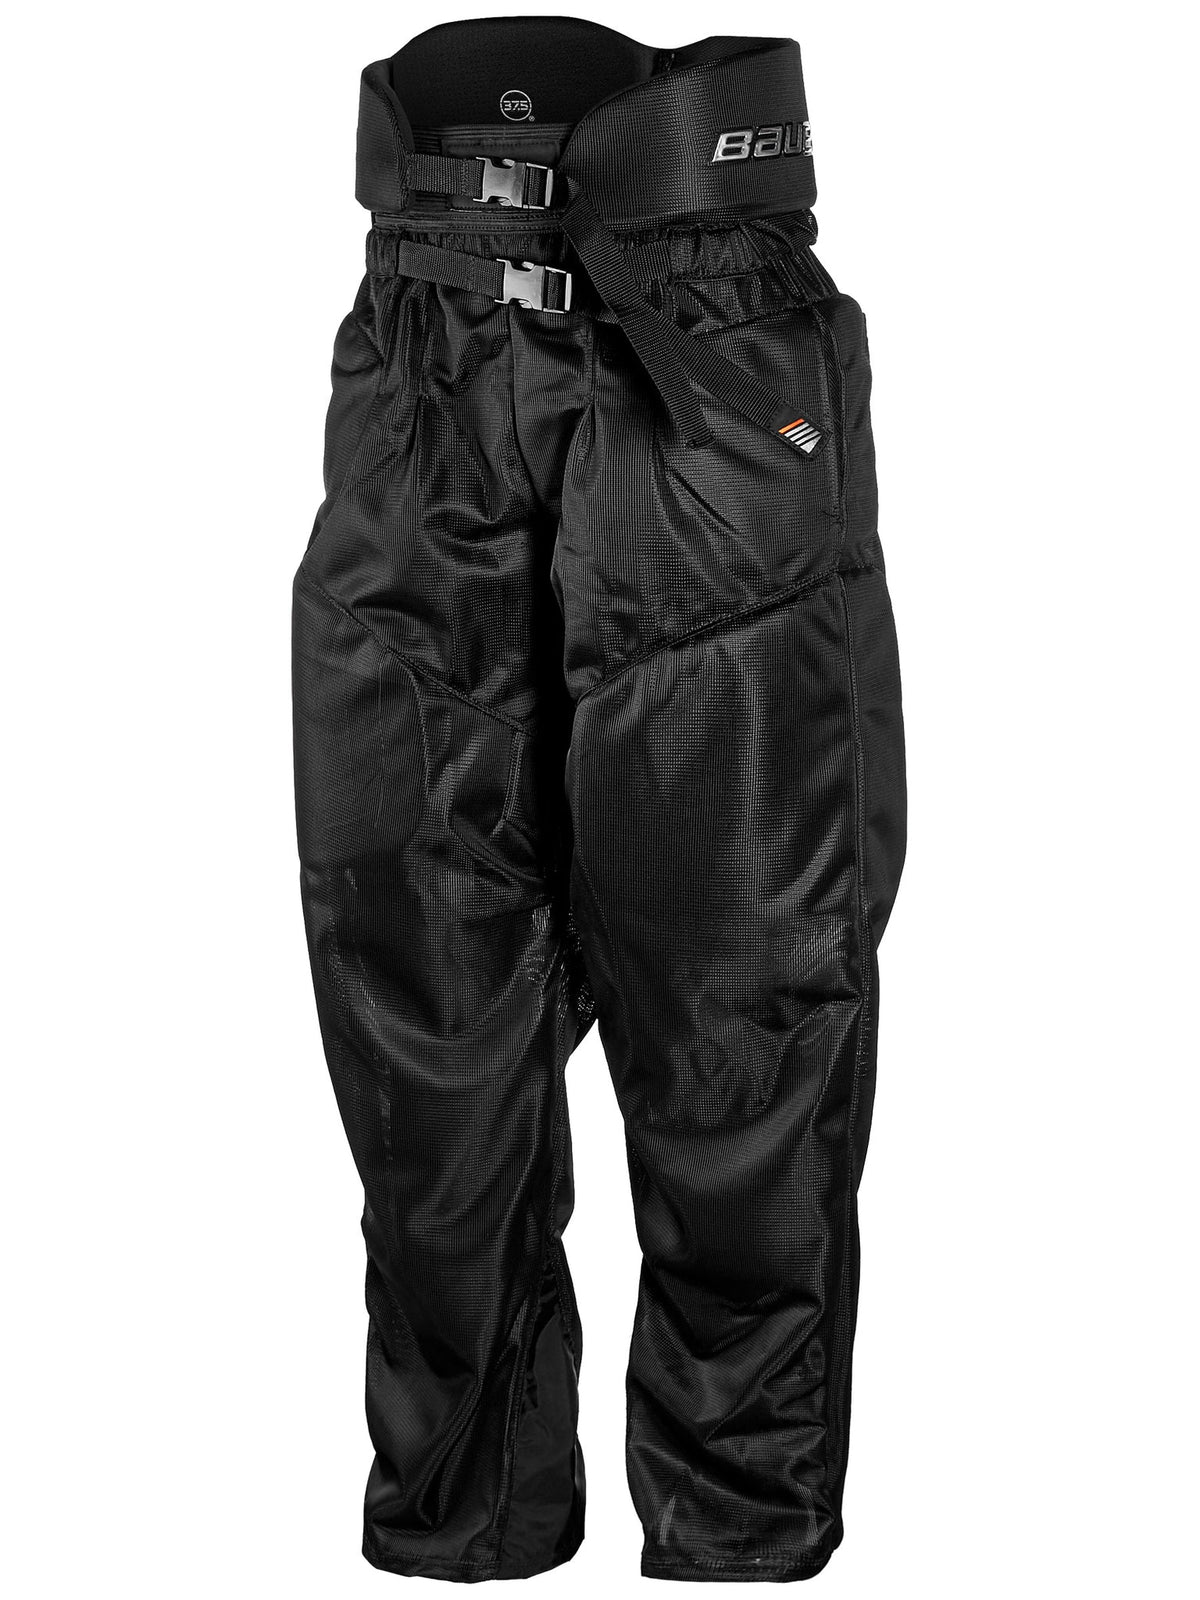 BAUER OFFICIAL'S PANT W/ INT. GIRDLE